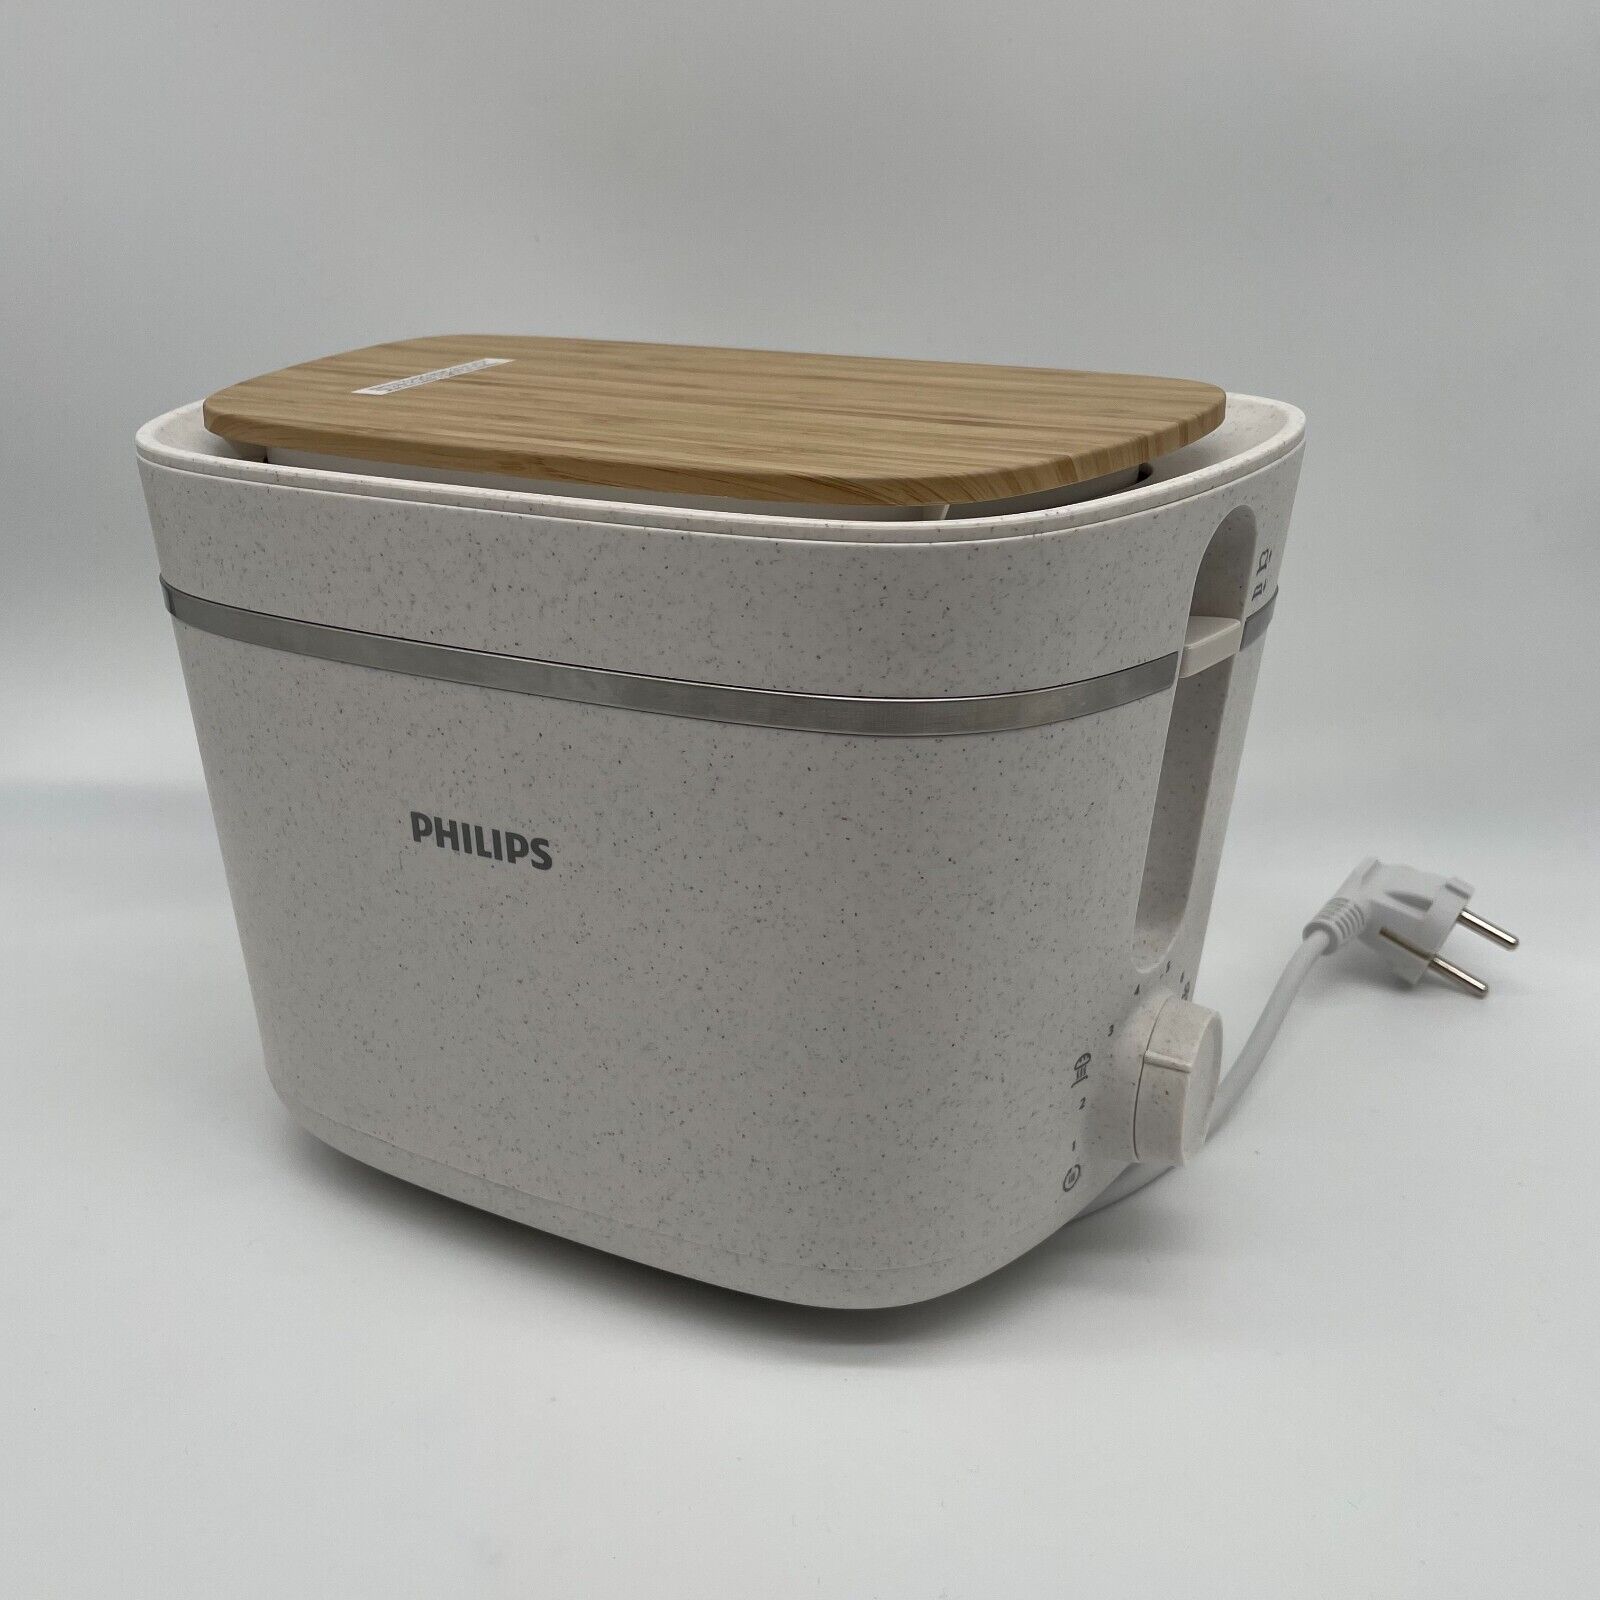 Philips Toaster NEU OVP 5000 Series Eco Conscious Edition Beige HD2640 830W